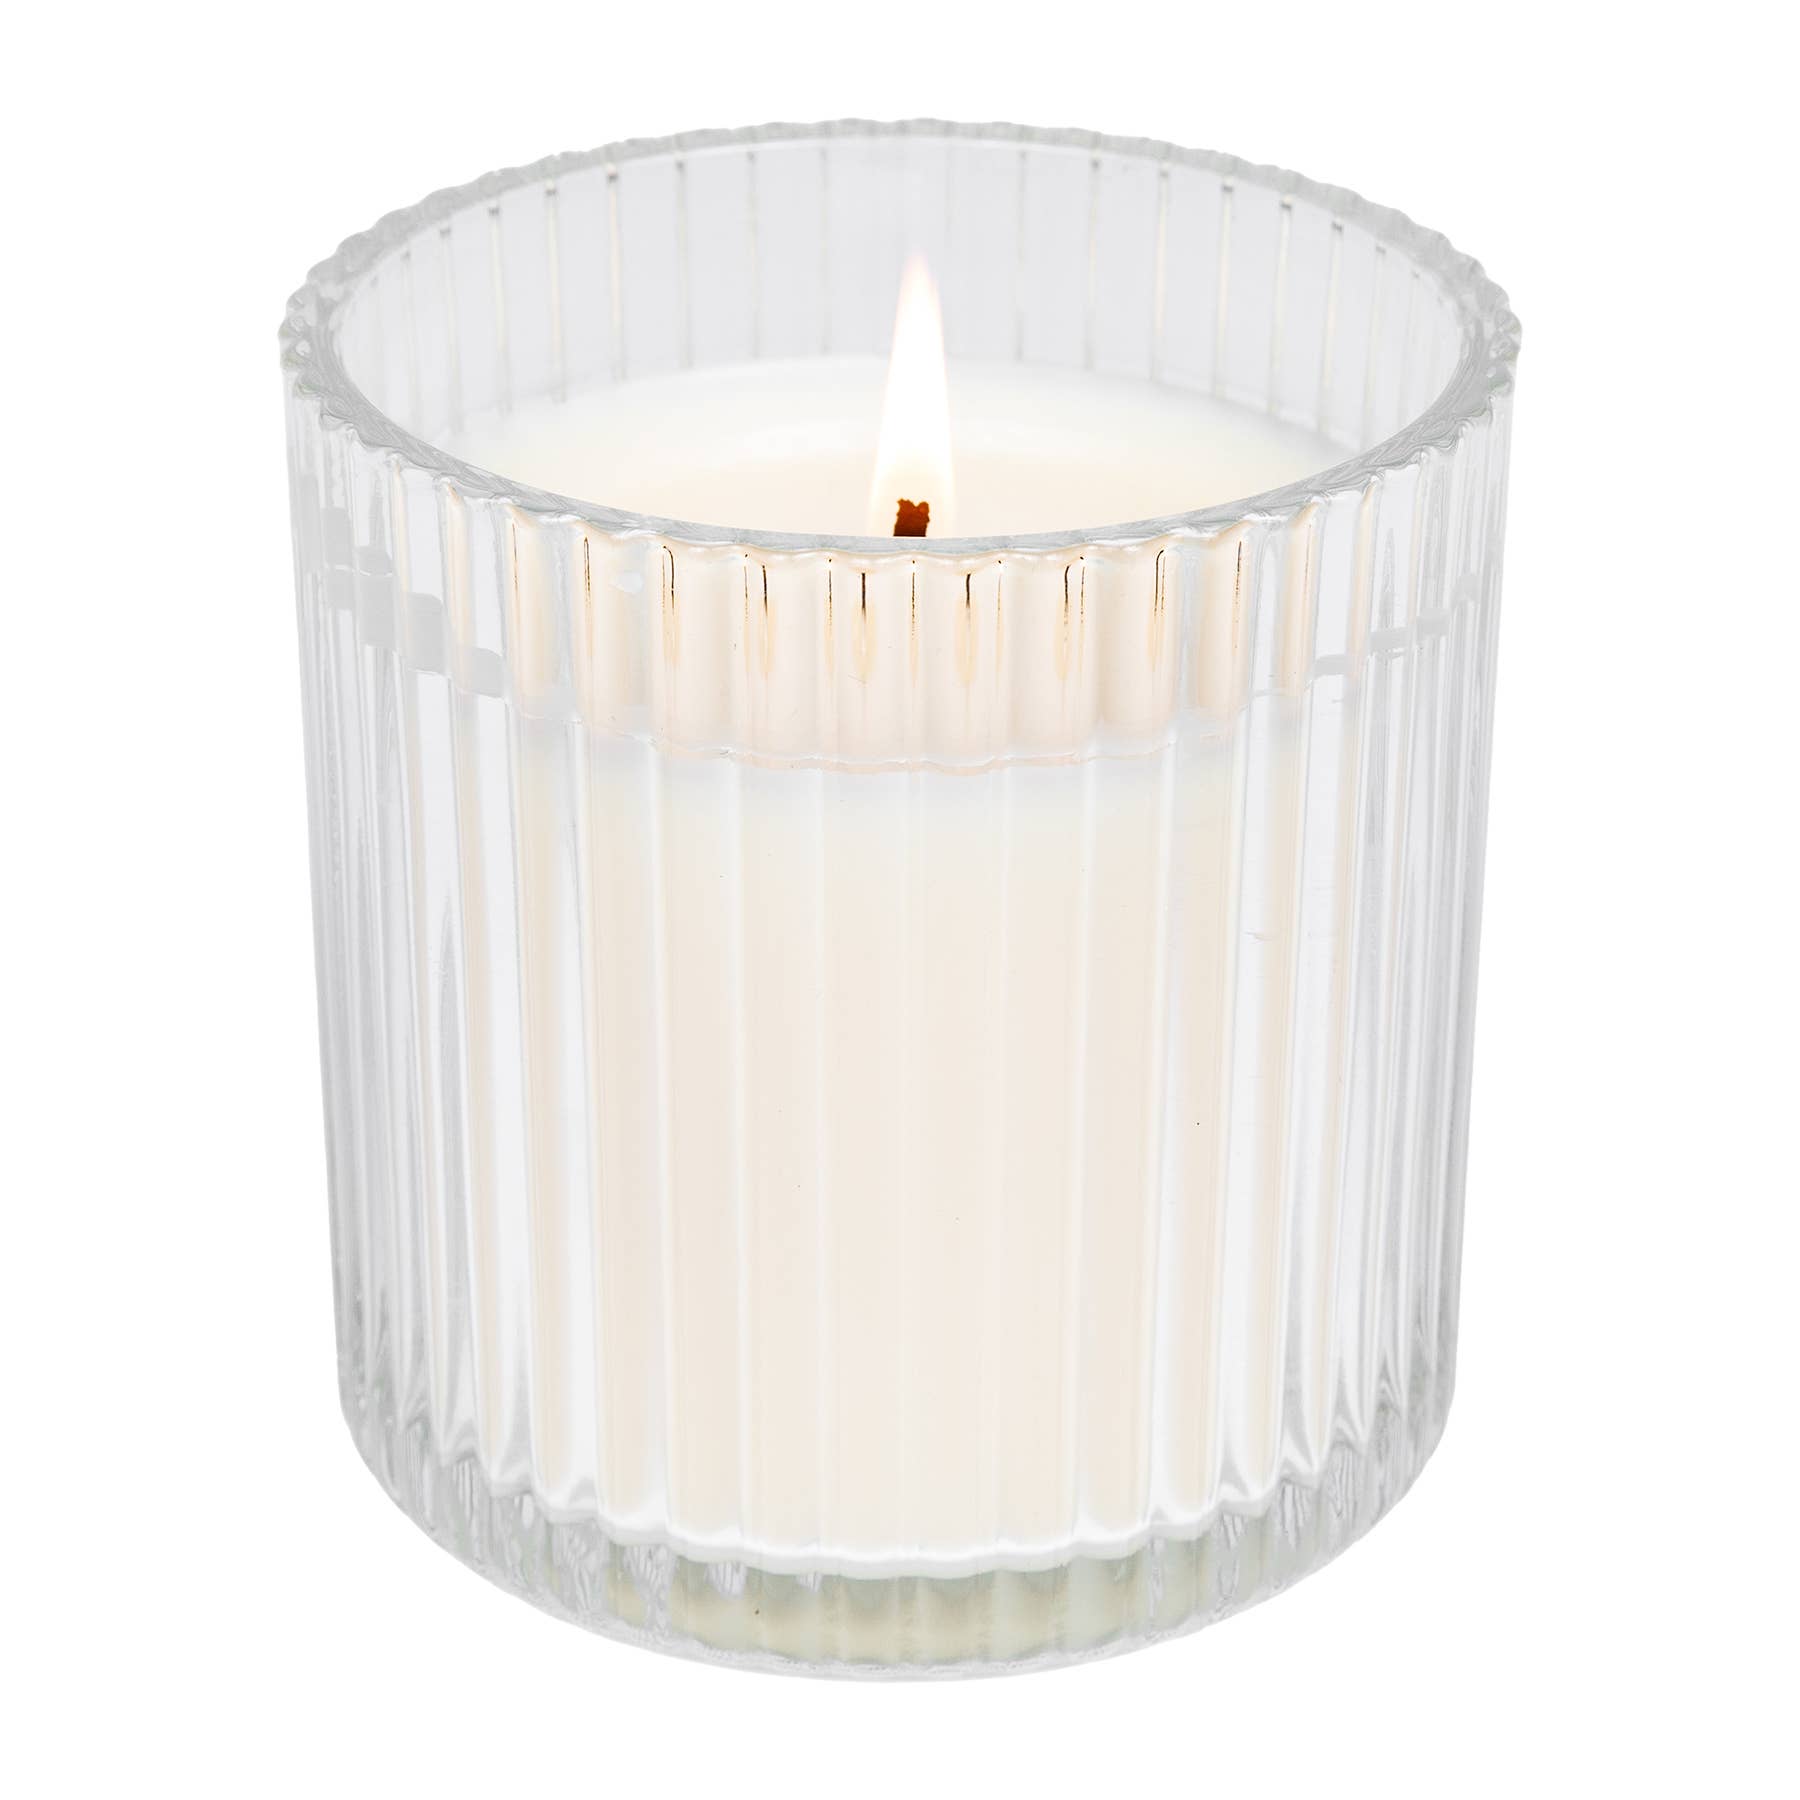 *NEW* Cashmere and Vanilla 11 oz Soy Candle, Ribbed Jar